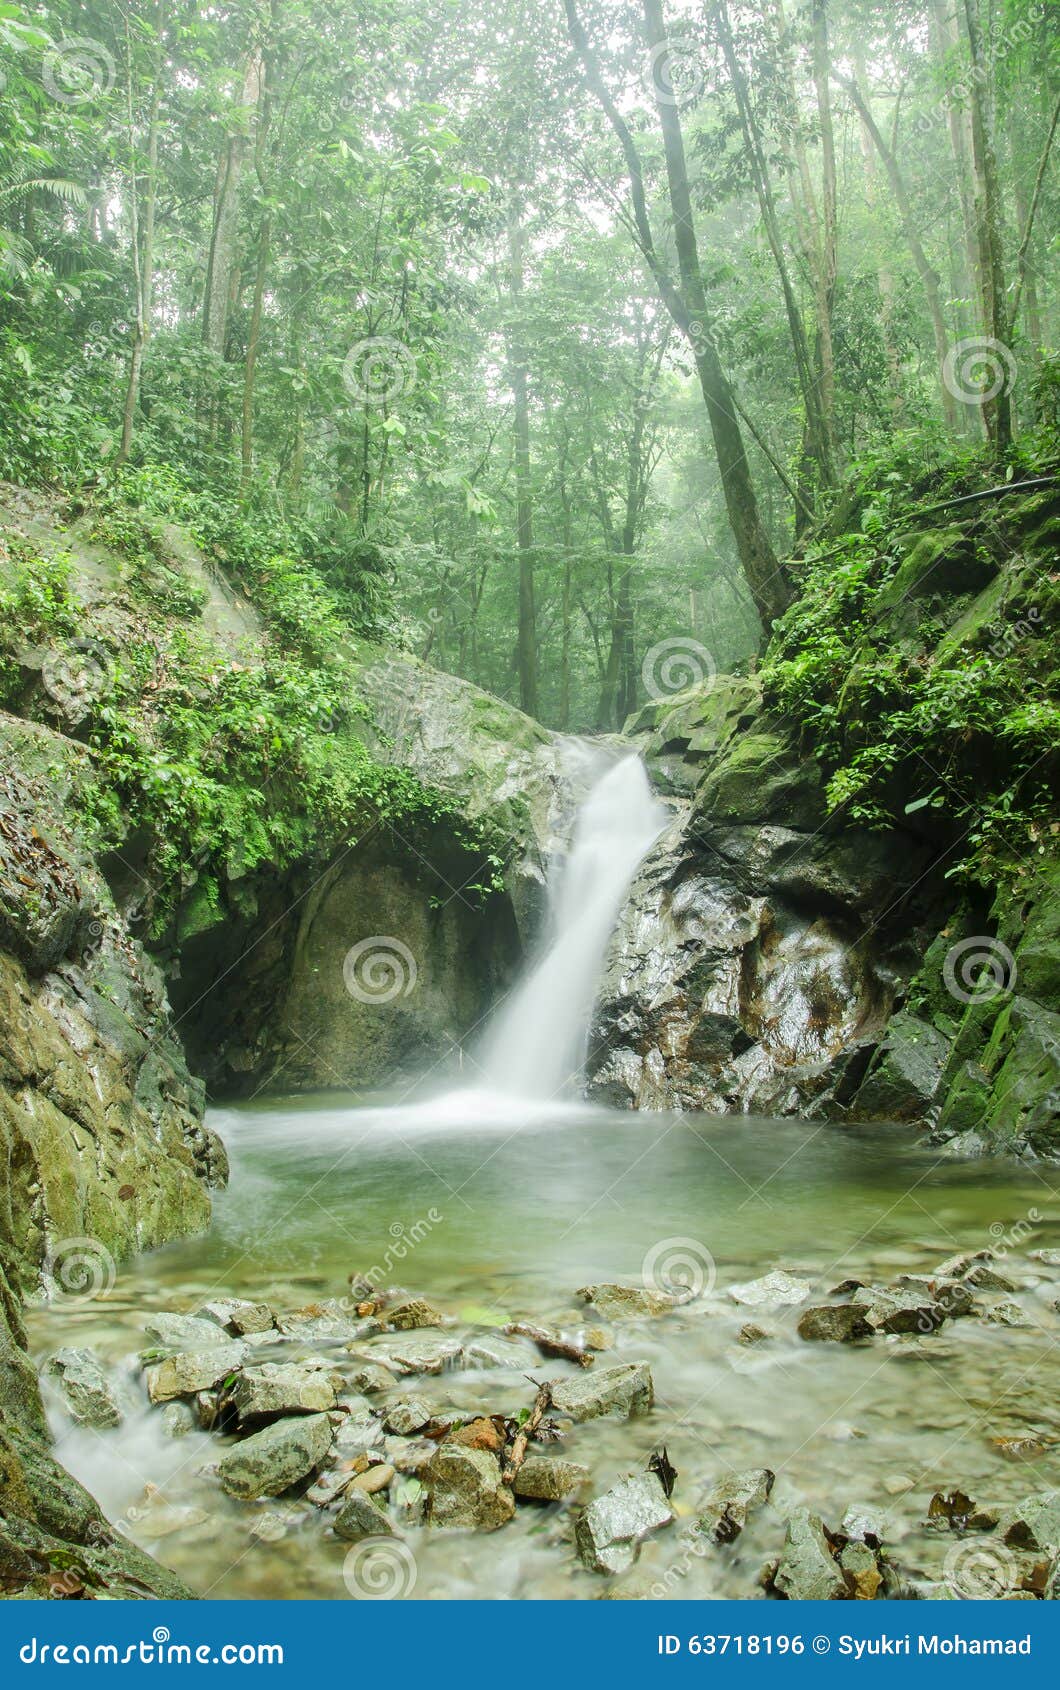 86 Waterfall Sungai Photos Free Royalty Free Stock Photos From Dreamstime